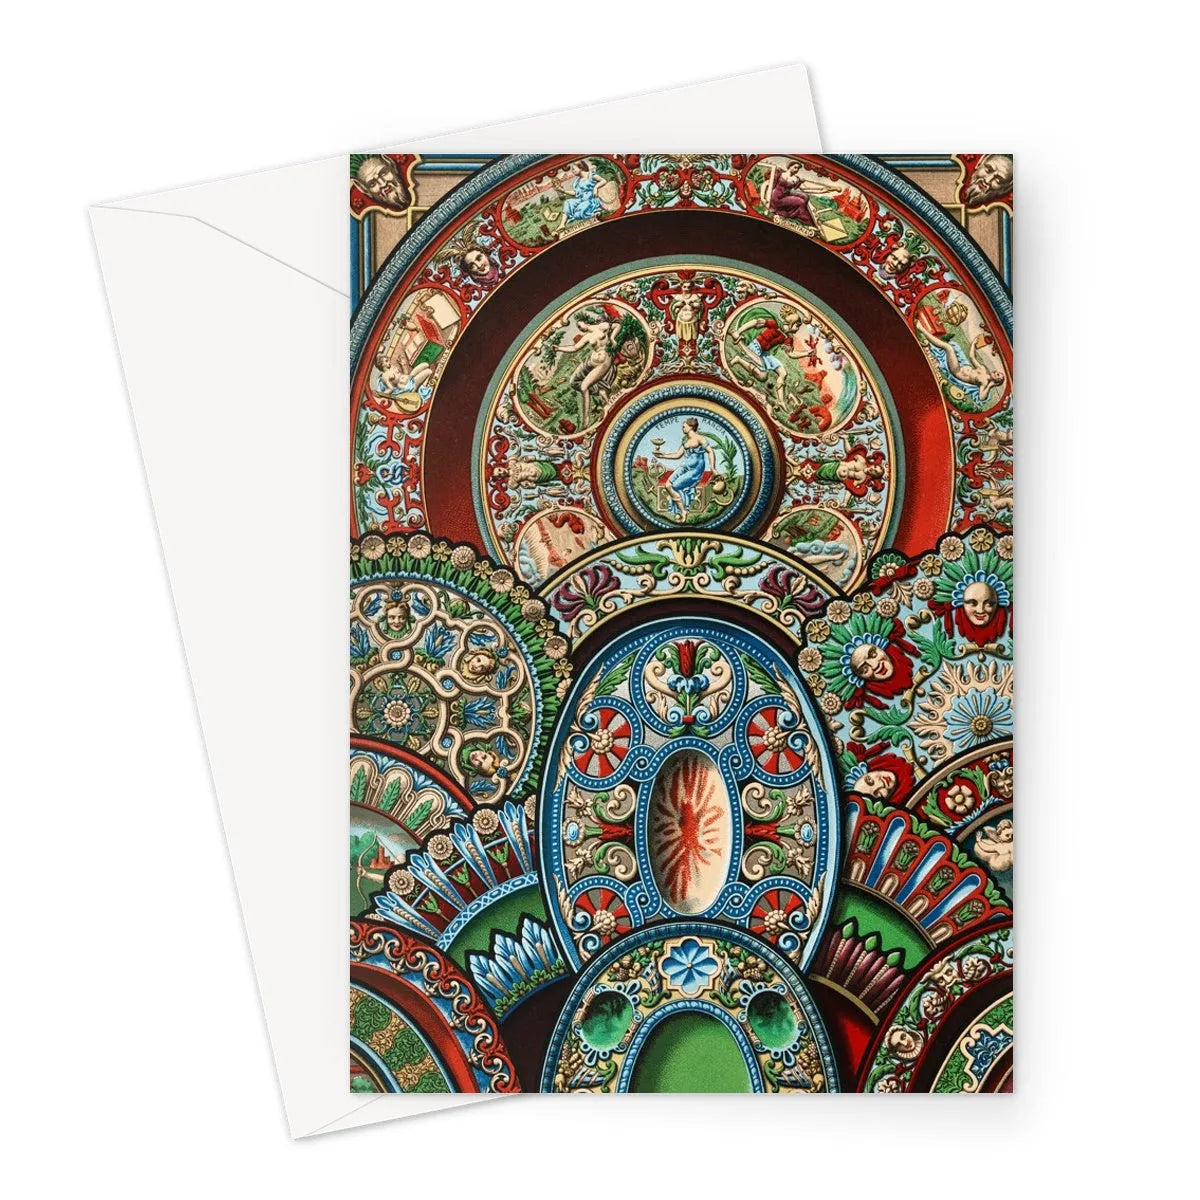 Renaissance Pattern - Auguste Racinet Greeting Card - A5 Portrait / 1 Card - Greeting & Note Cards - Aesthetic Art